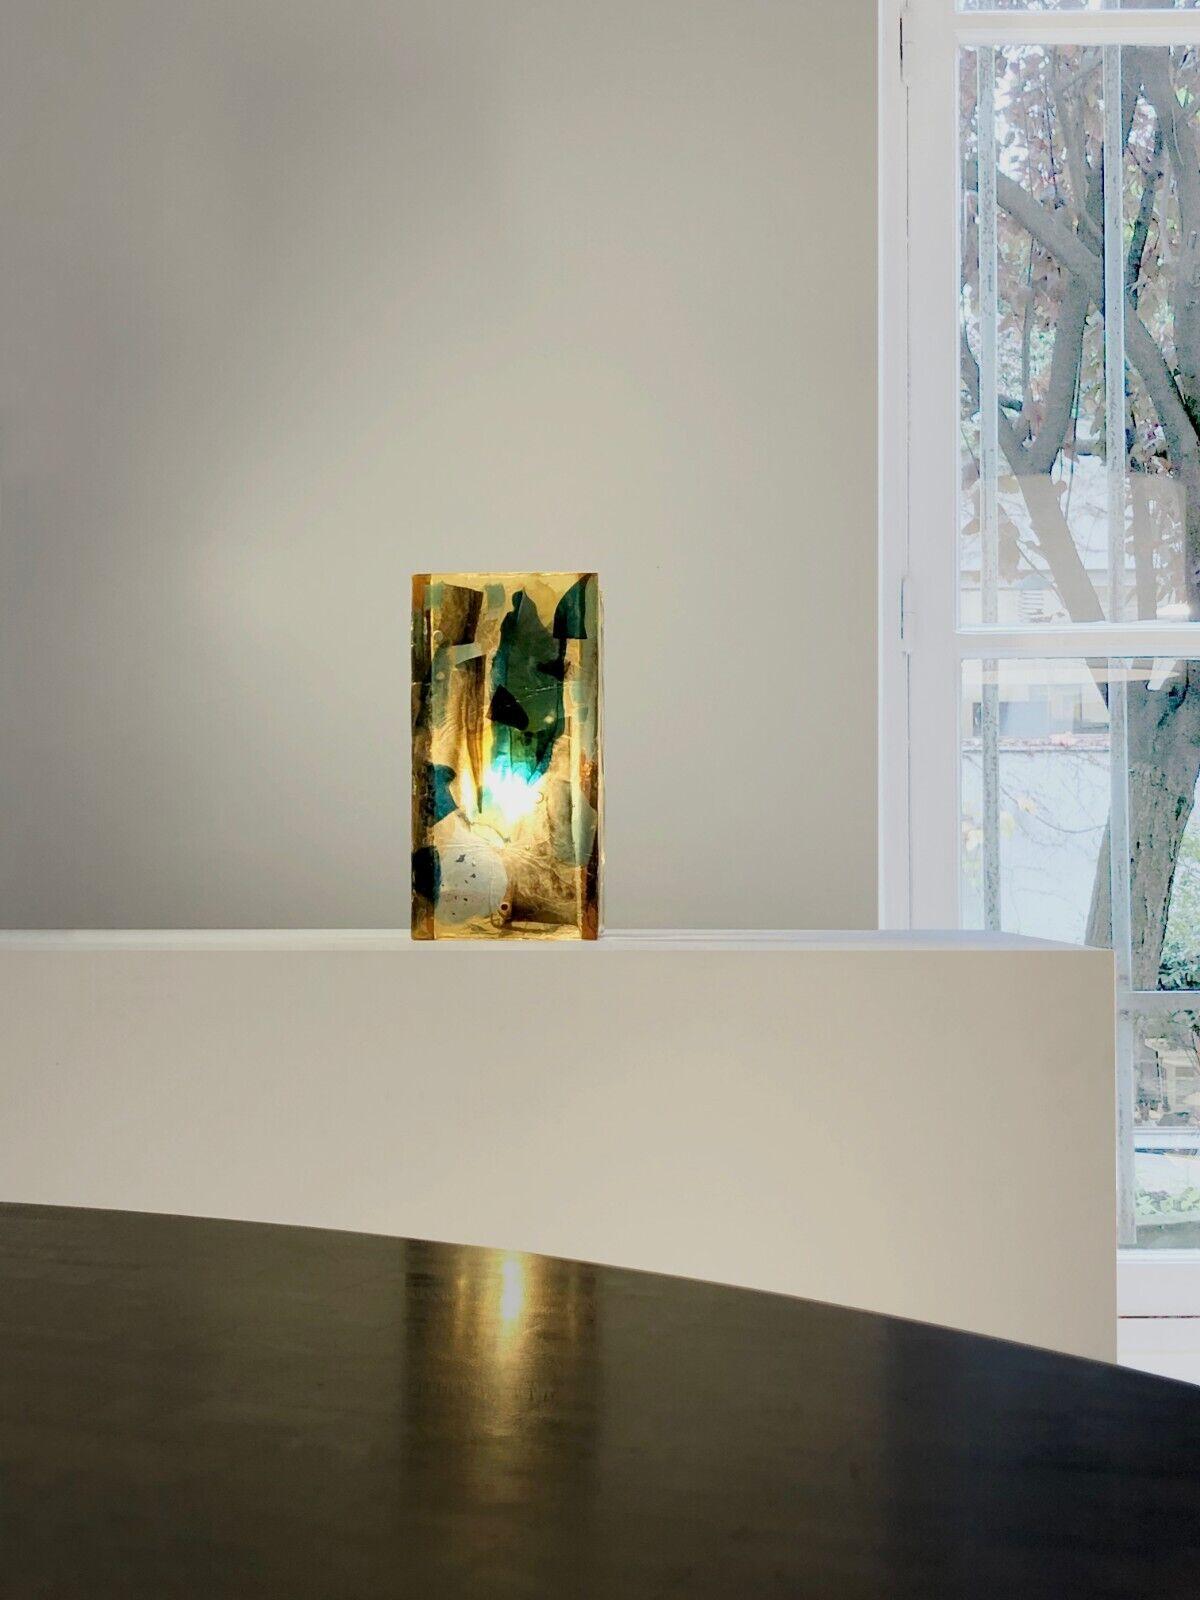 An important and rigorous rectangular table lamp with free decoration, Modernist, Post-Bauhaus, from Forme-Libre, geometric structure in 4 thick strips of amber plexiglass resin with blue and black graphic decorations included, artist's work to be